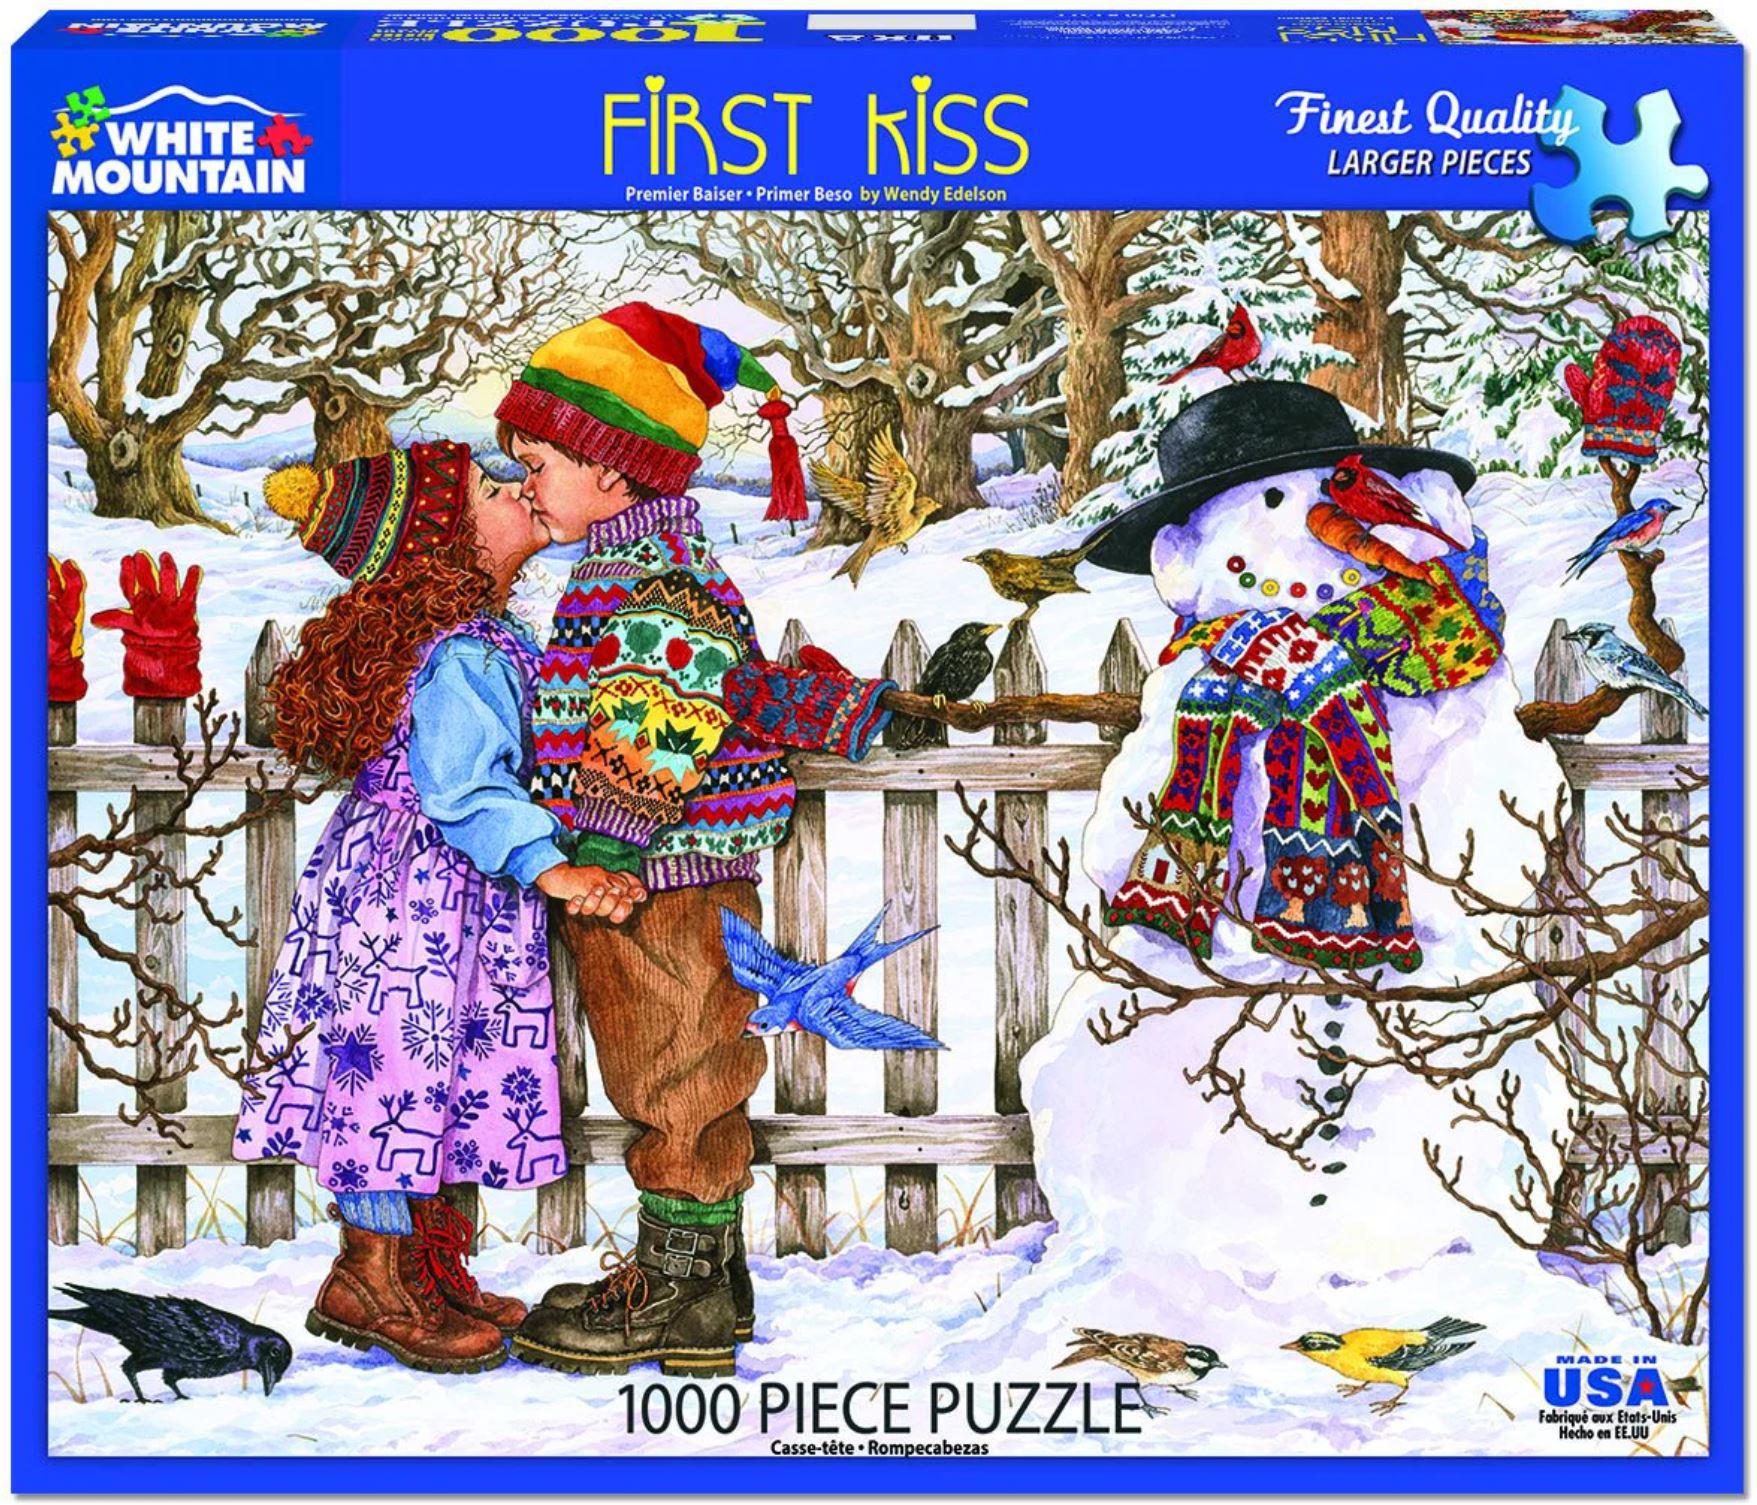 White Mountain Jigsaw Puzzle | First Kiss 1000 Piece